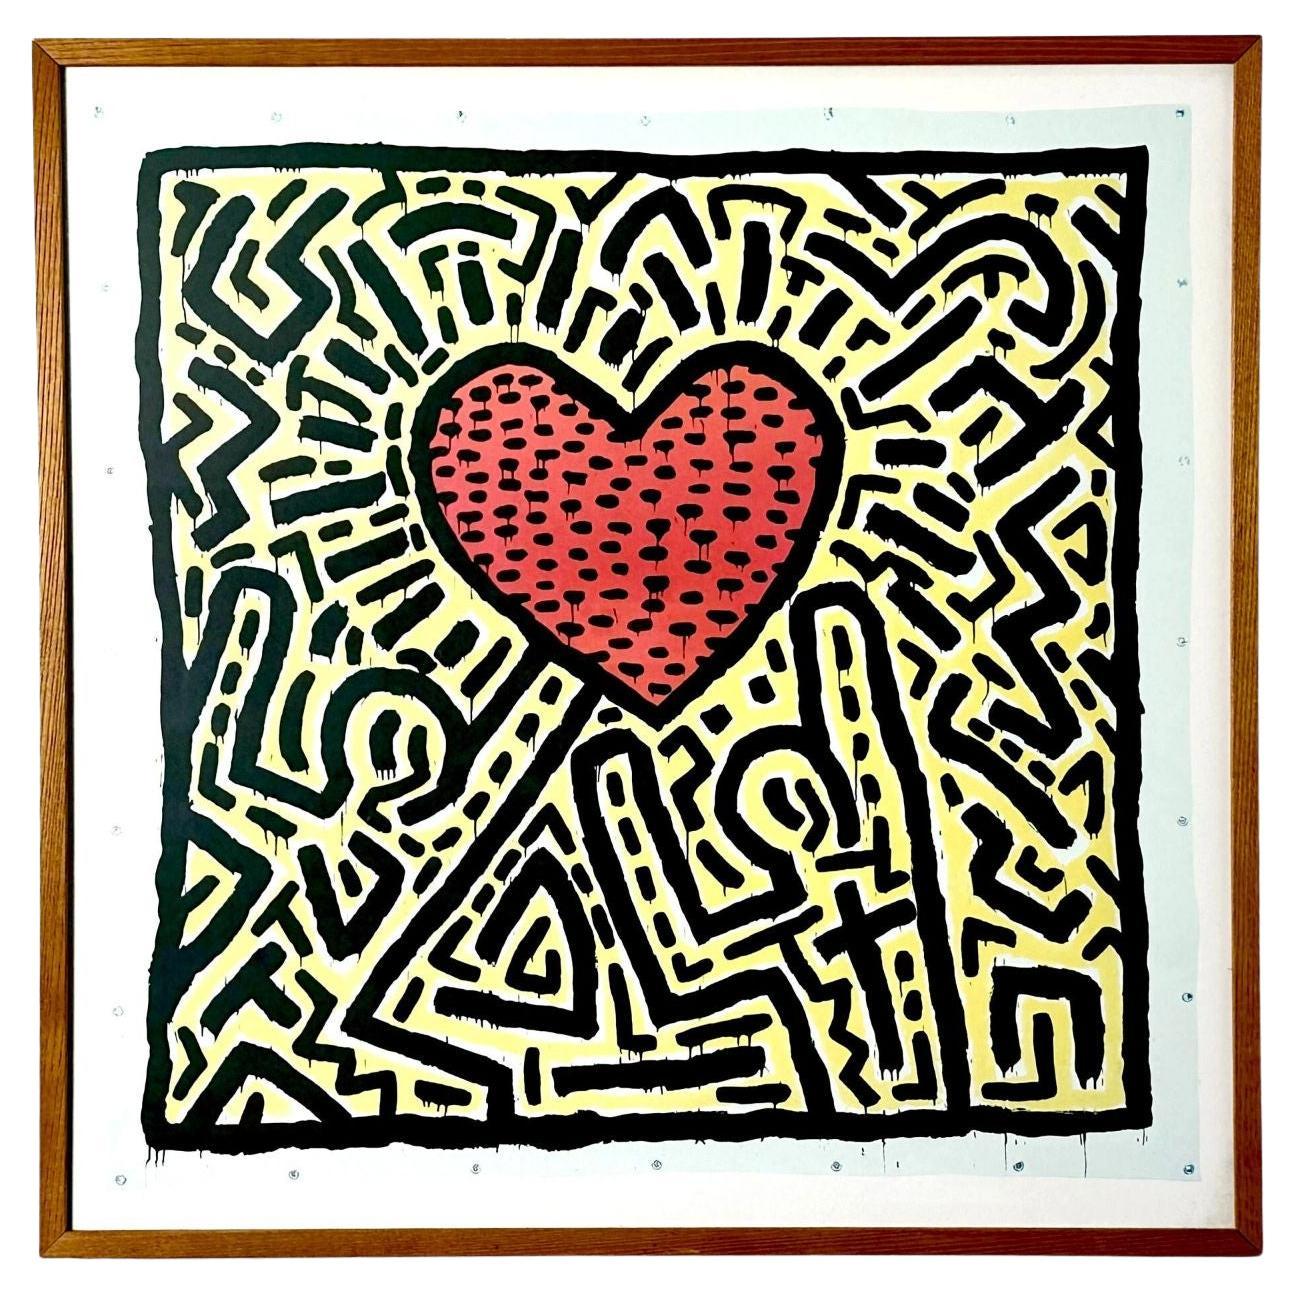 Pop Art Two Figures and Heart Abstract Framed Print by Keith Haring 1982